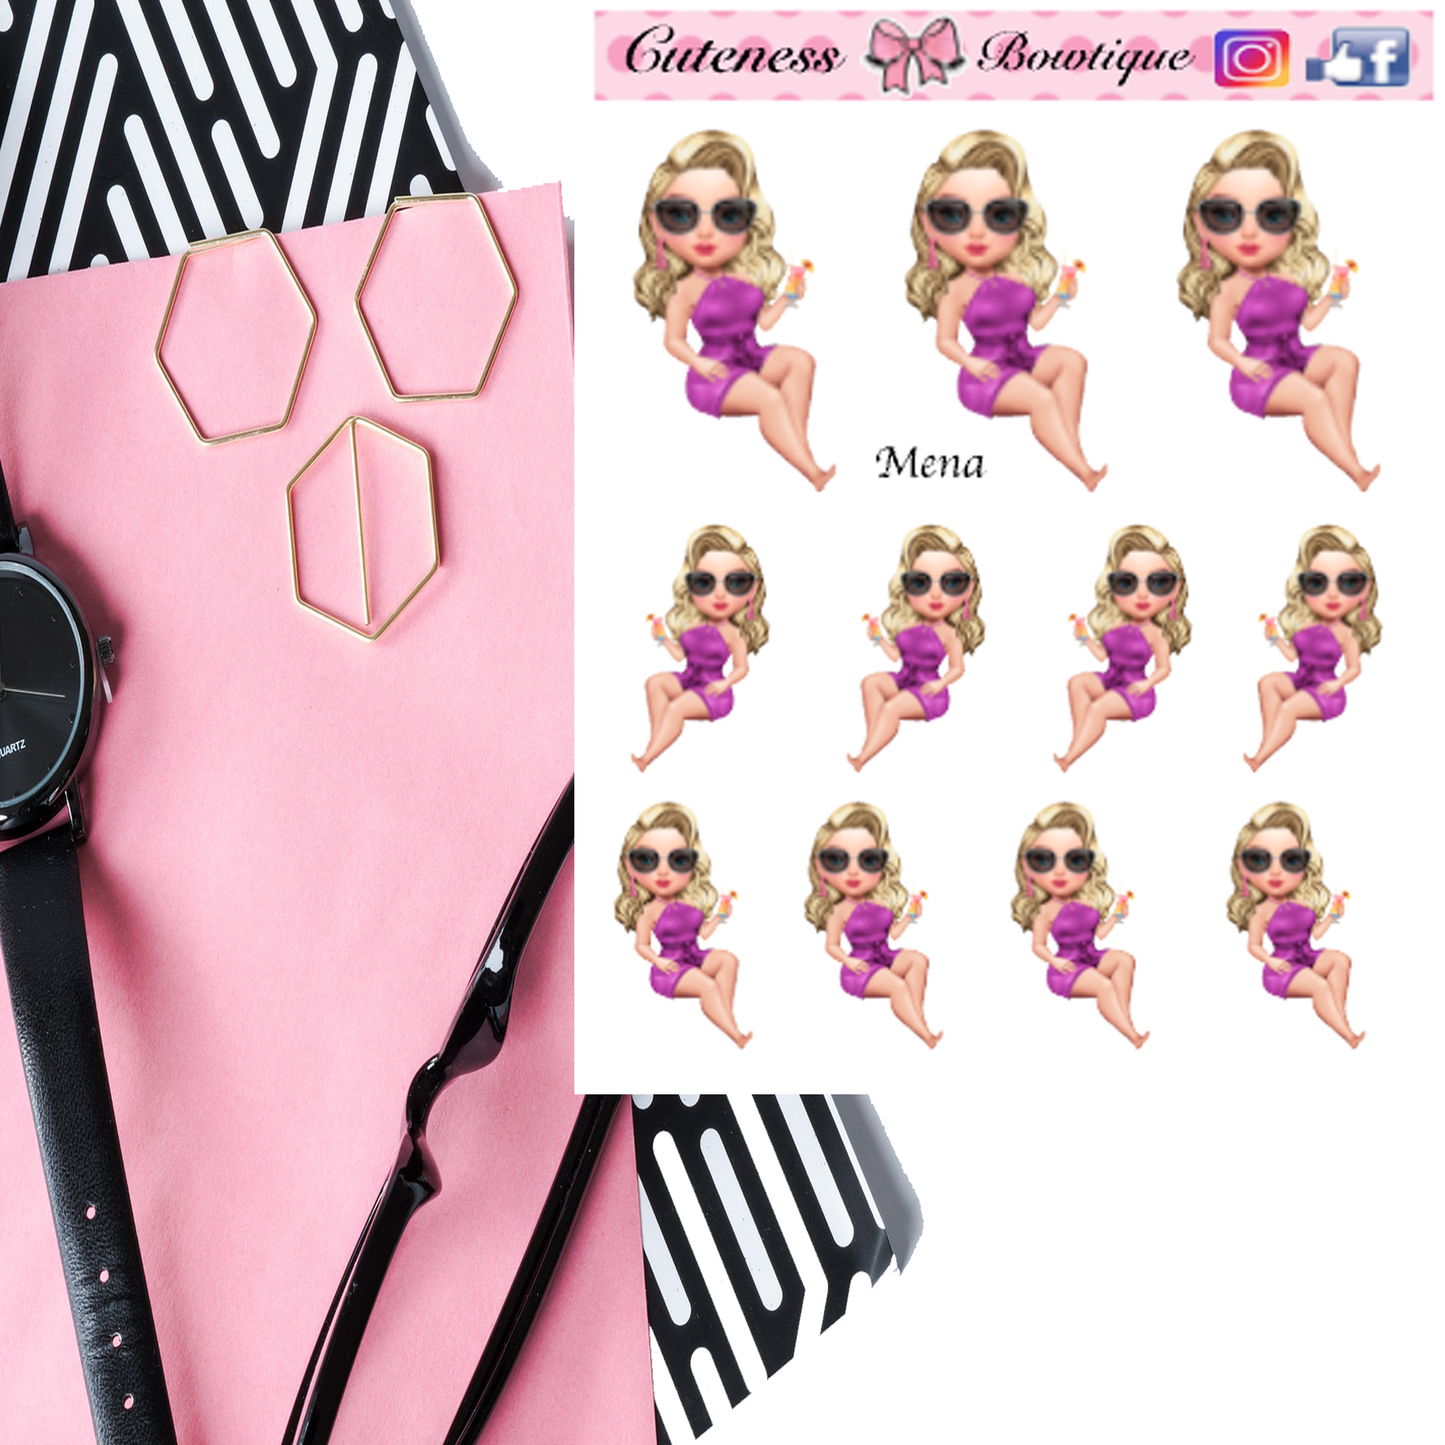 The Cuteness Doll Collection Sticker Sheet | Cuteness Planner Stickers for Agendas, Planners, Notebooks, Dividers | MENA